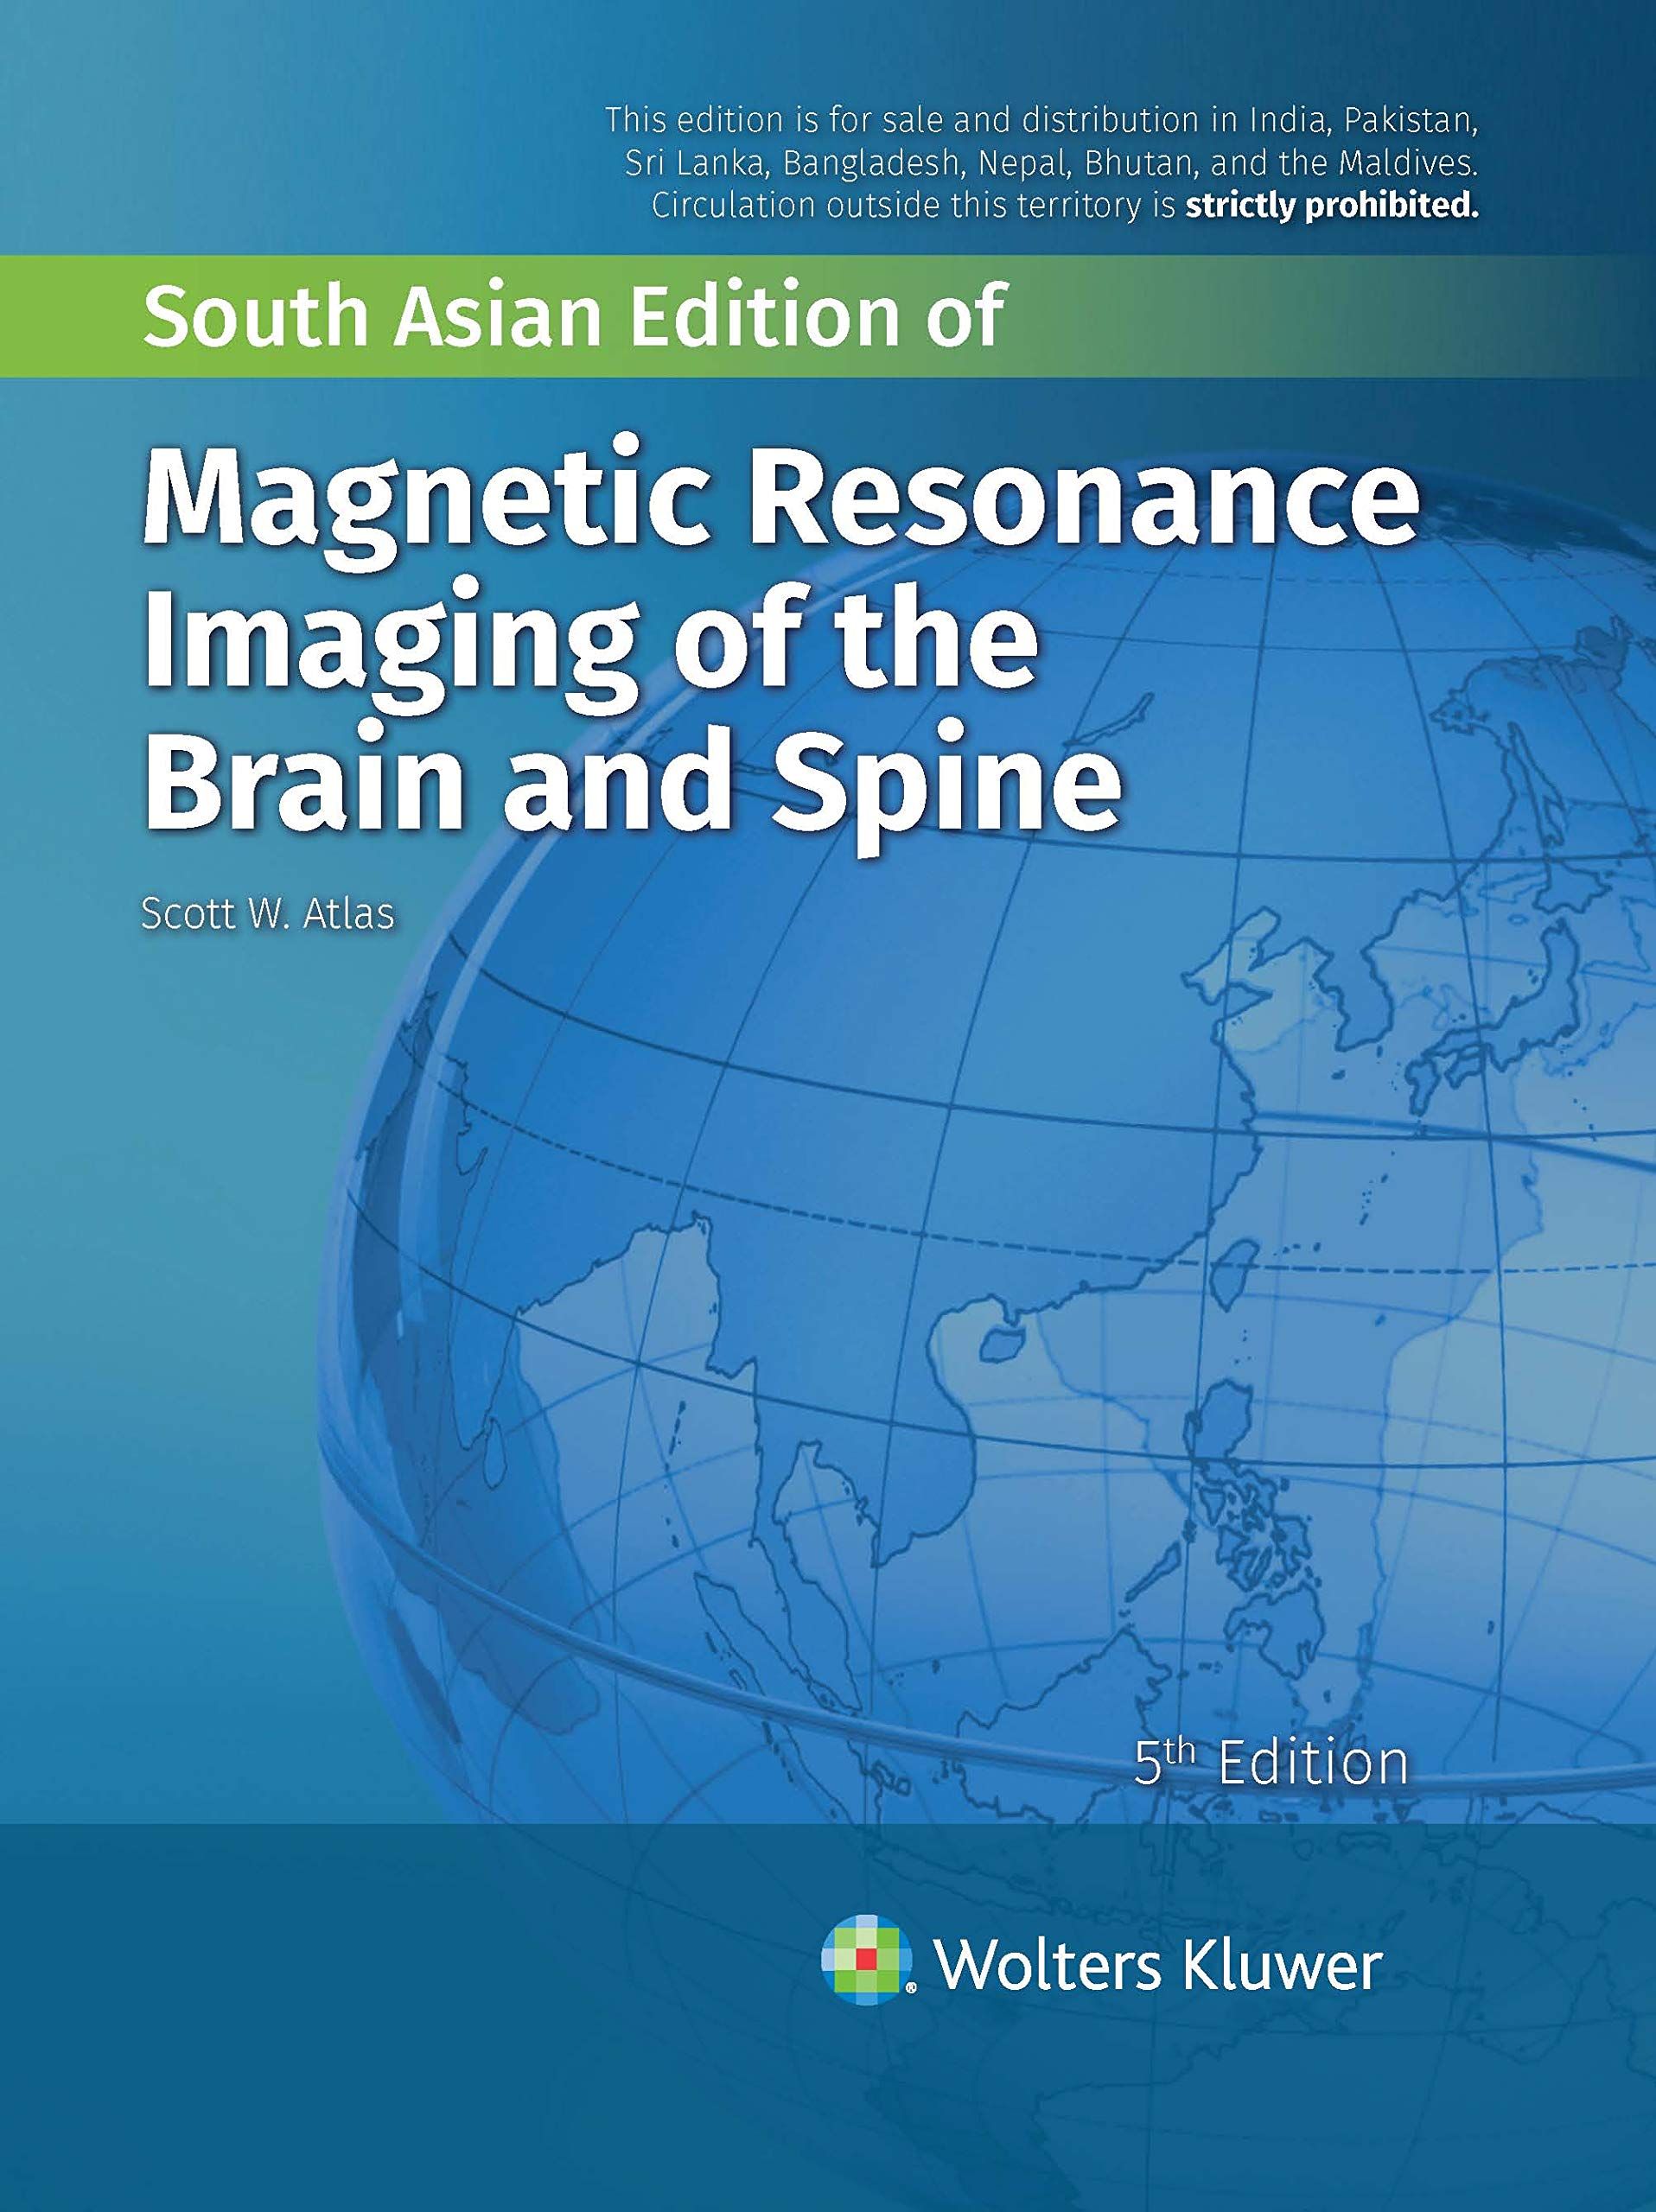 

clinical-sciences/radiology/magnetic-resonance-imaging-of-the-brain-and-spine-5th-south-asian-edition--9789390612178